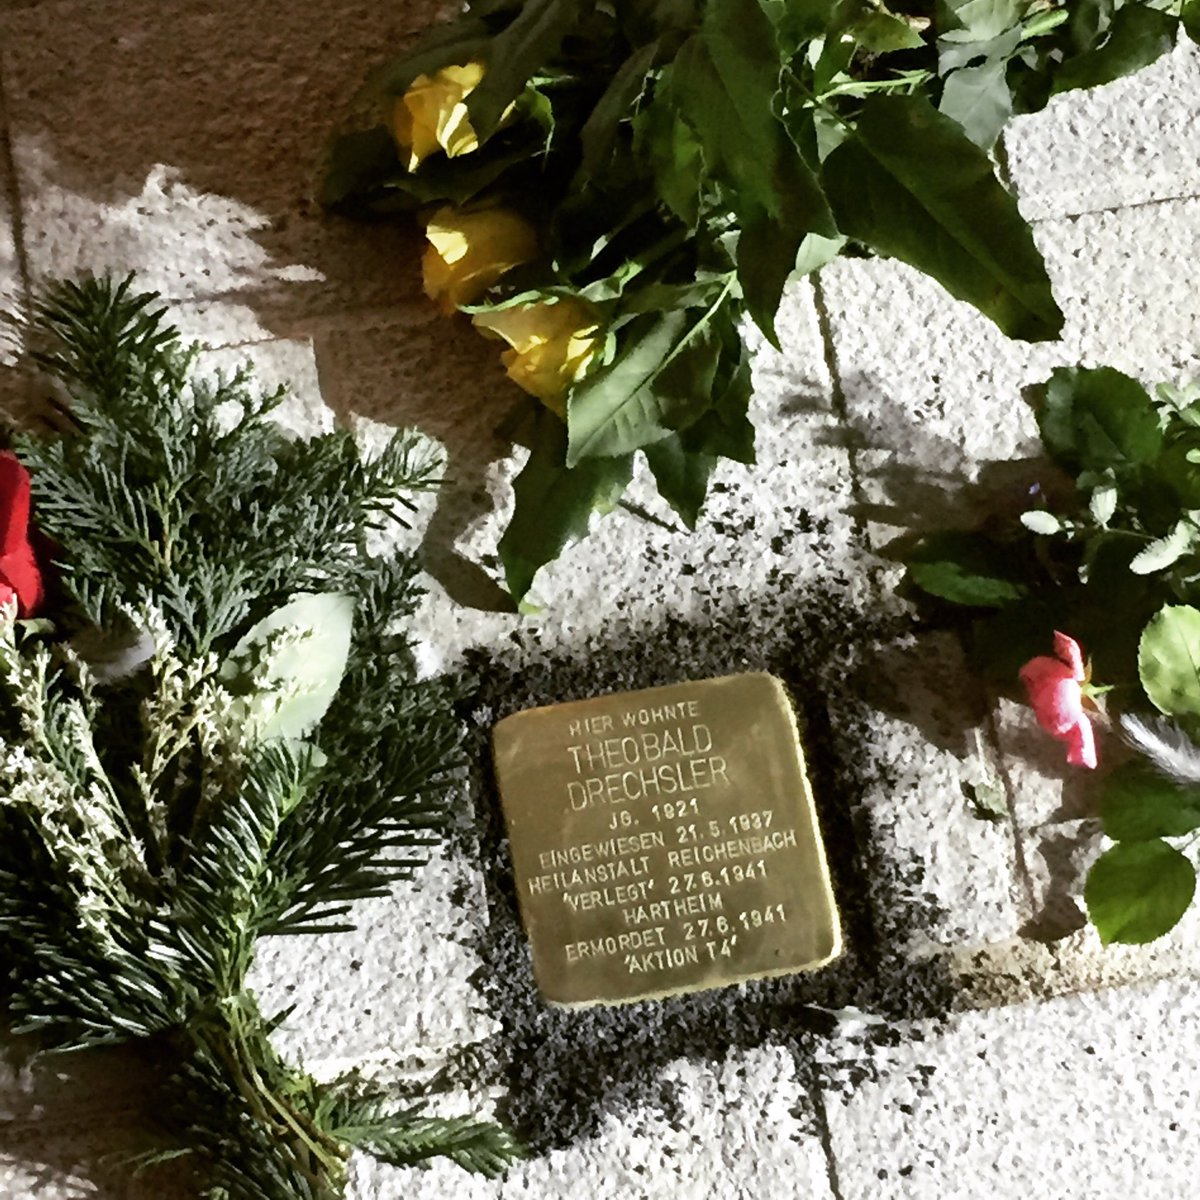 While you wander around, keep an eye out for  @_Stolpersteine_ - small ‘stumbling stones’ that memorialise the victims of the Nazis who lives in our city and strolled these streets.